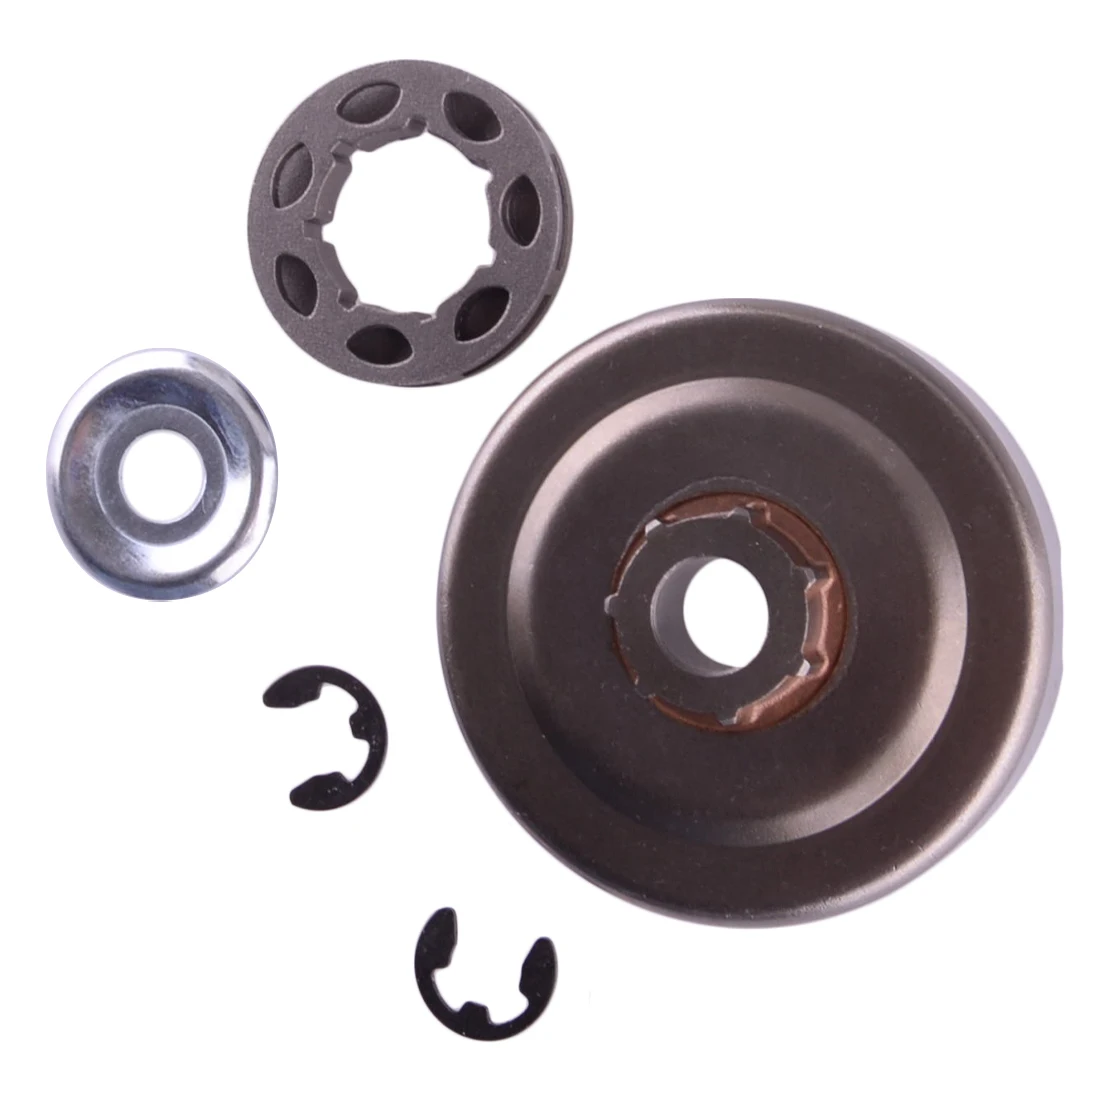 

99944400395 3/8" 7T Clutch Drum Washer Clip Rim Sprocket Kits Fit for Echo CS-352 CS-310 305S 340S Chainsaw